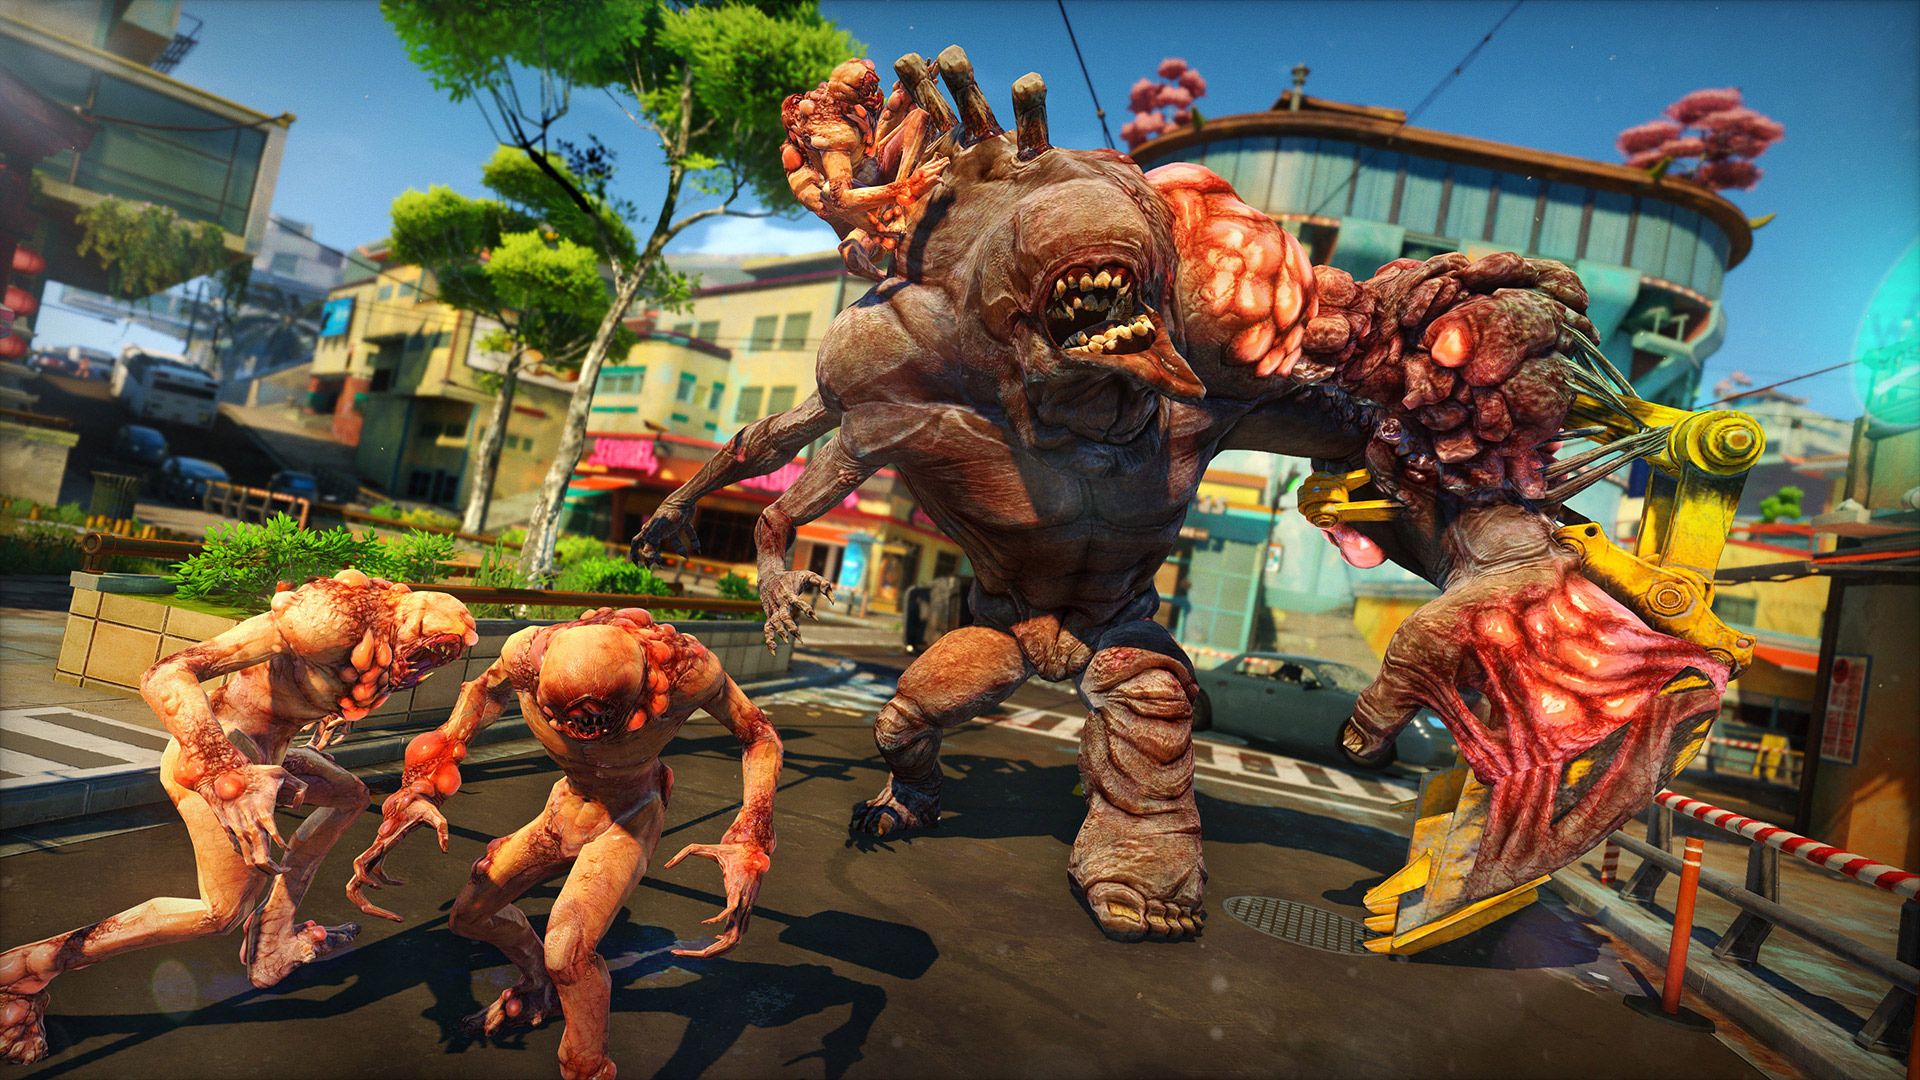 It looks like Sunset Overdrive has 8-player co-op